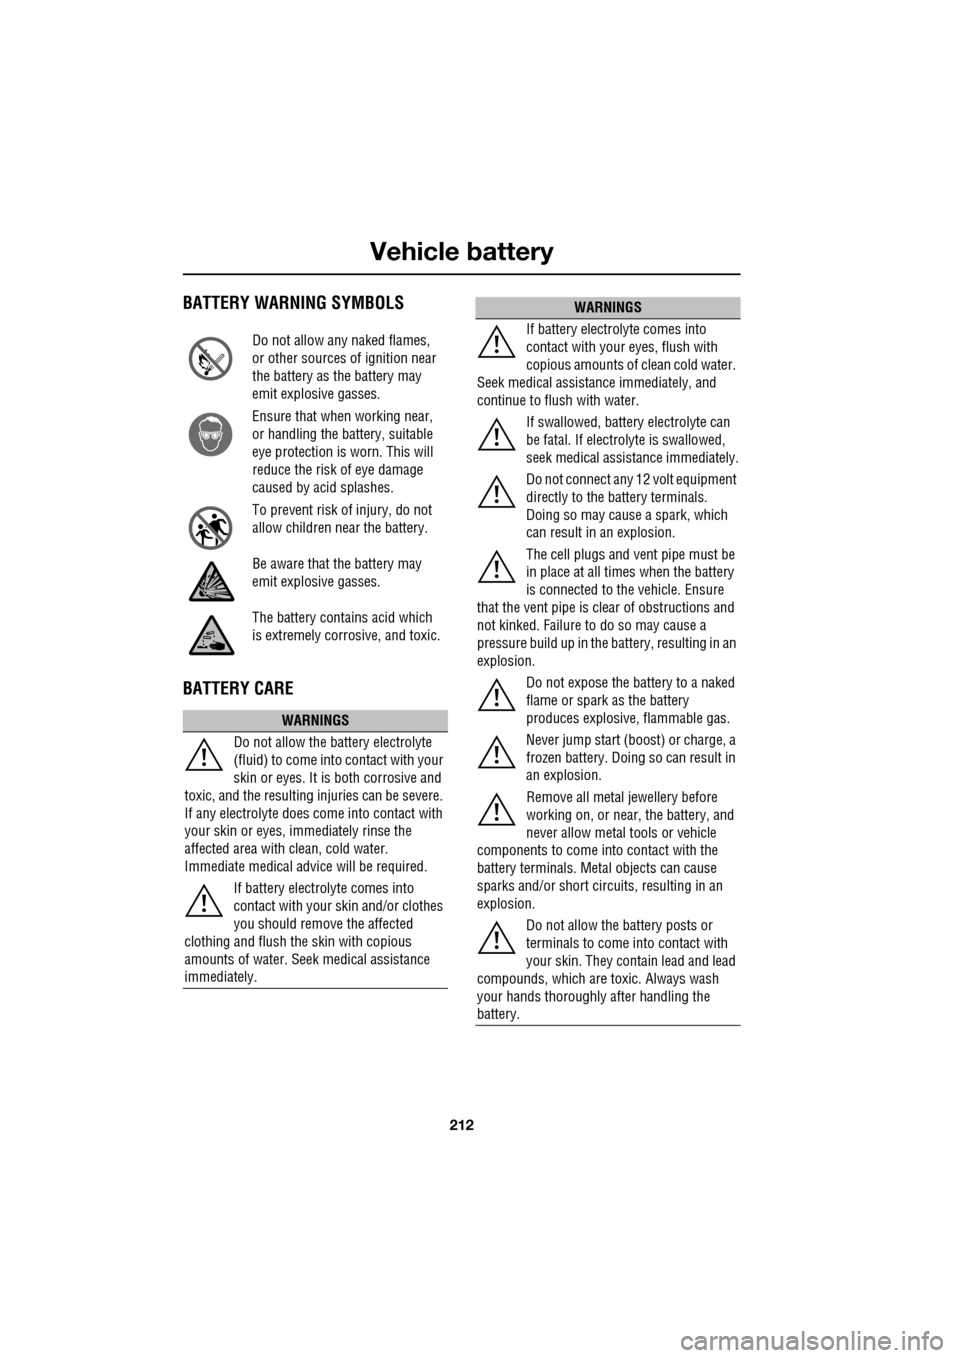 JAGUAR XF 2009 1.G User Guide Vehicle battery
212
               
 BATTERY WARNING SYMBOLS
BATTERY CARE
Do not allow any naked flames, 
or other sources of ignition near 
the battery as the battery may 
emit explosive gasses.
Ensu